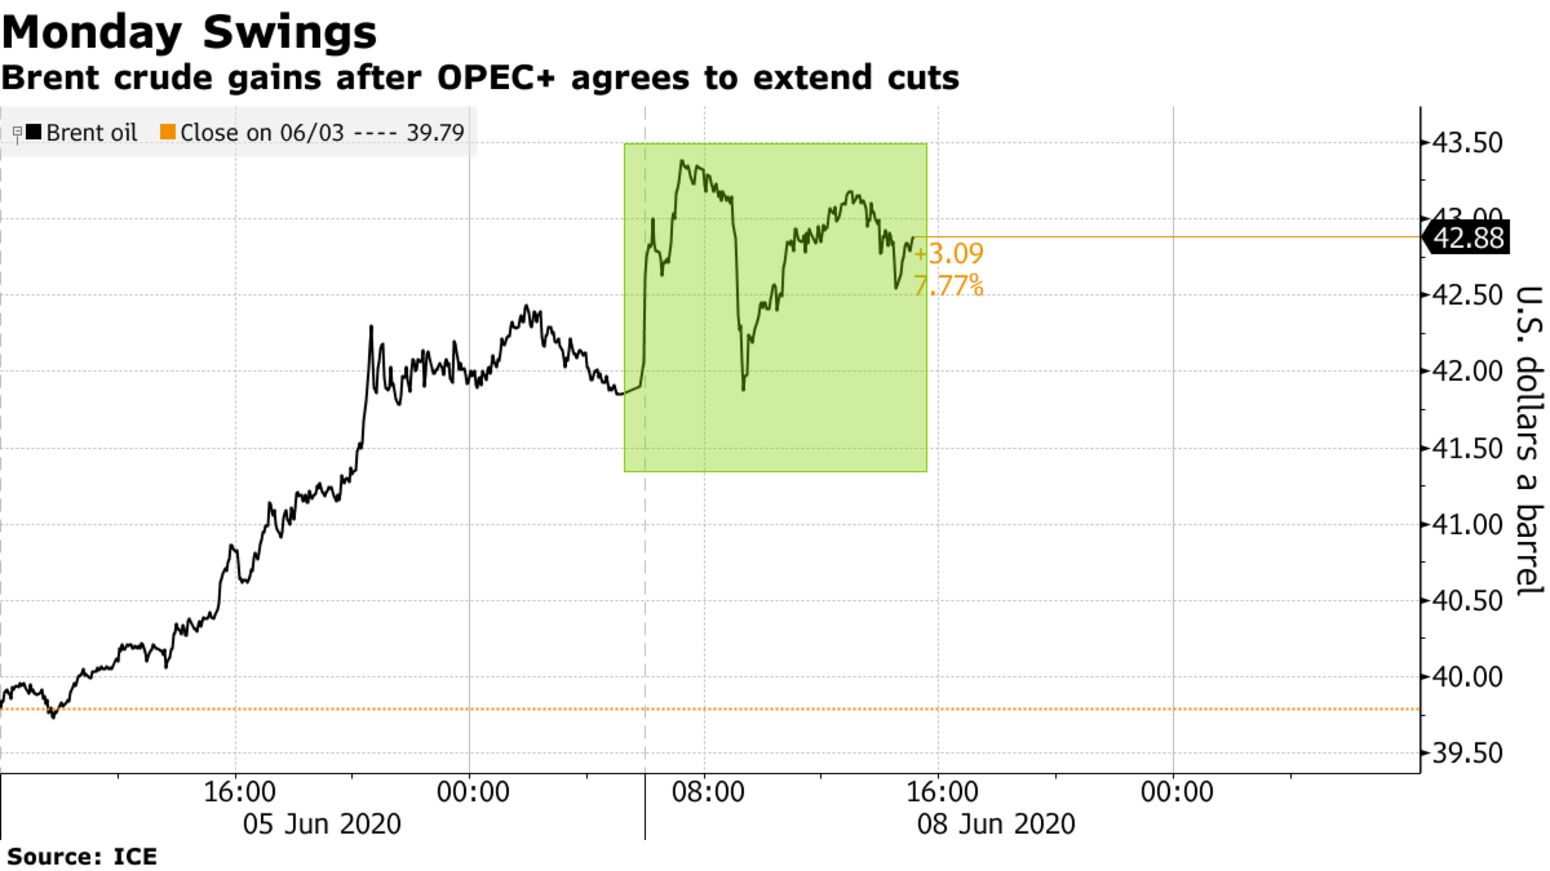 Brent crude gains after OPEC+ agrees to extend cuts